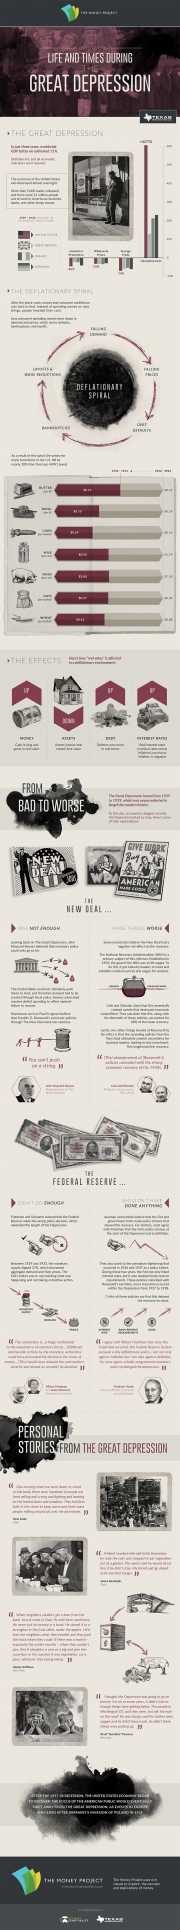 Life And Times During The Great Depression [Infographic]